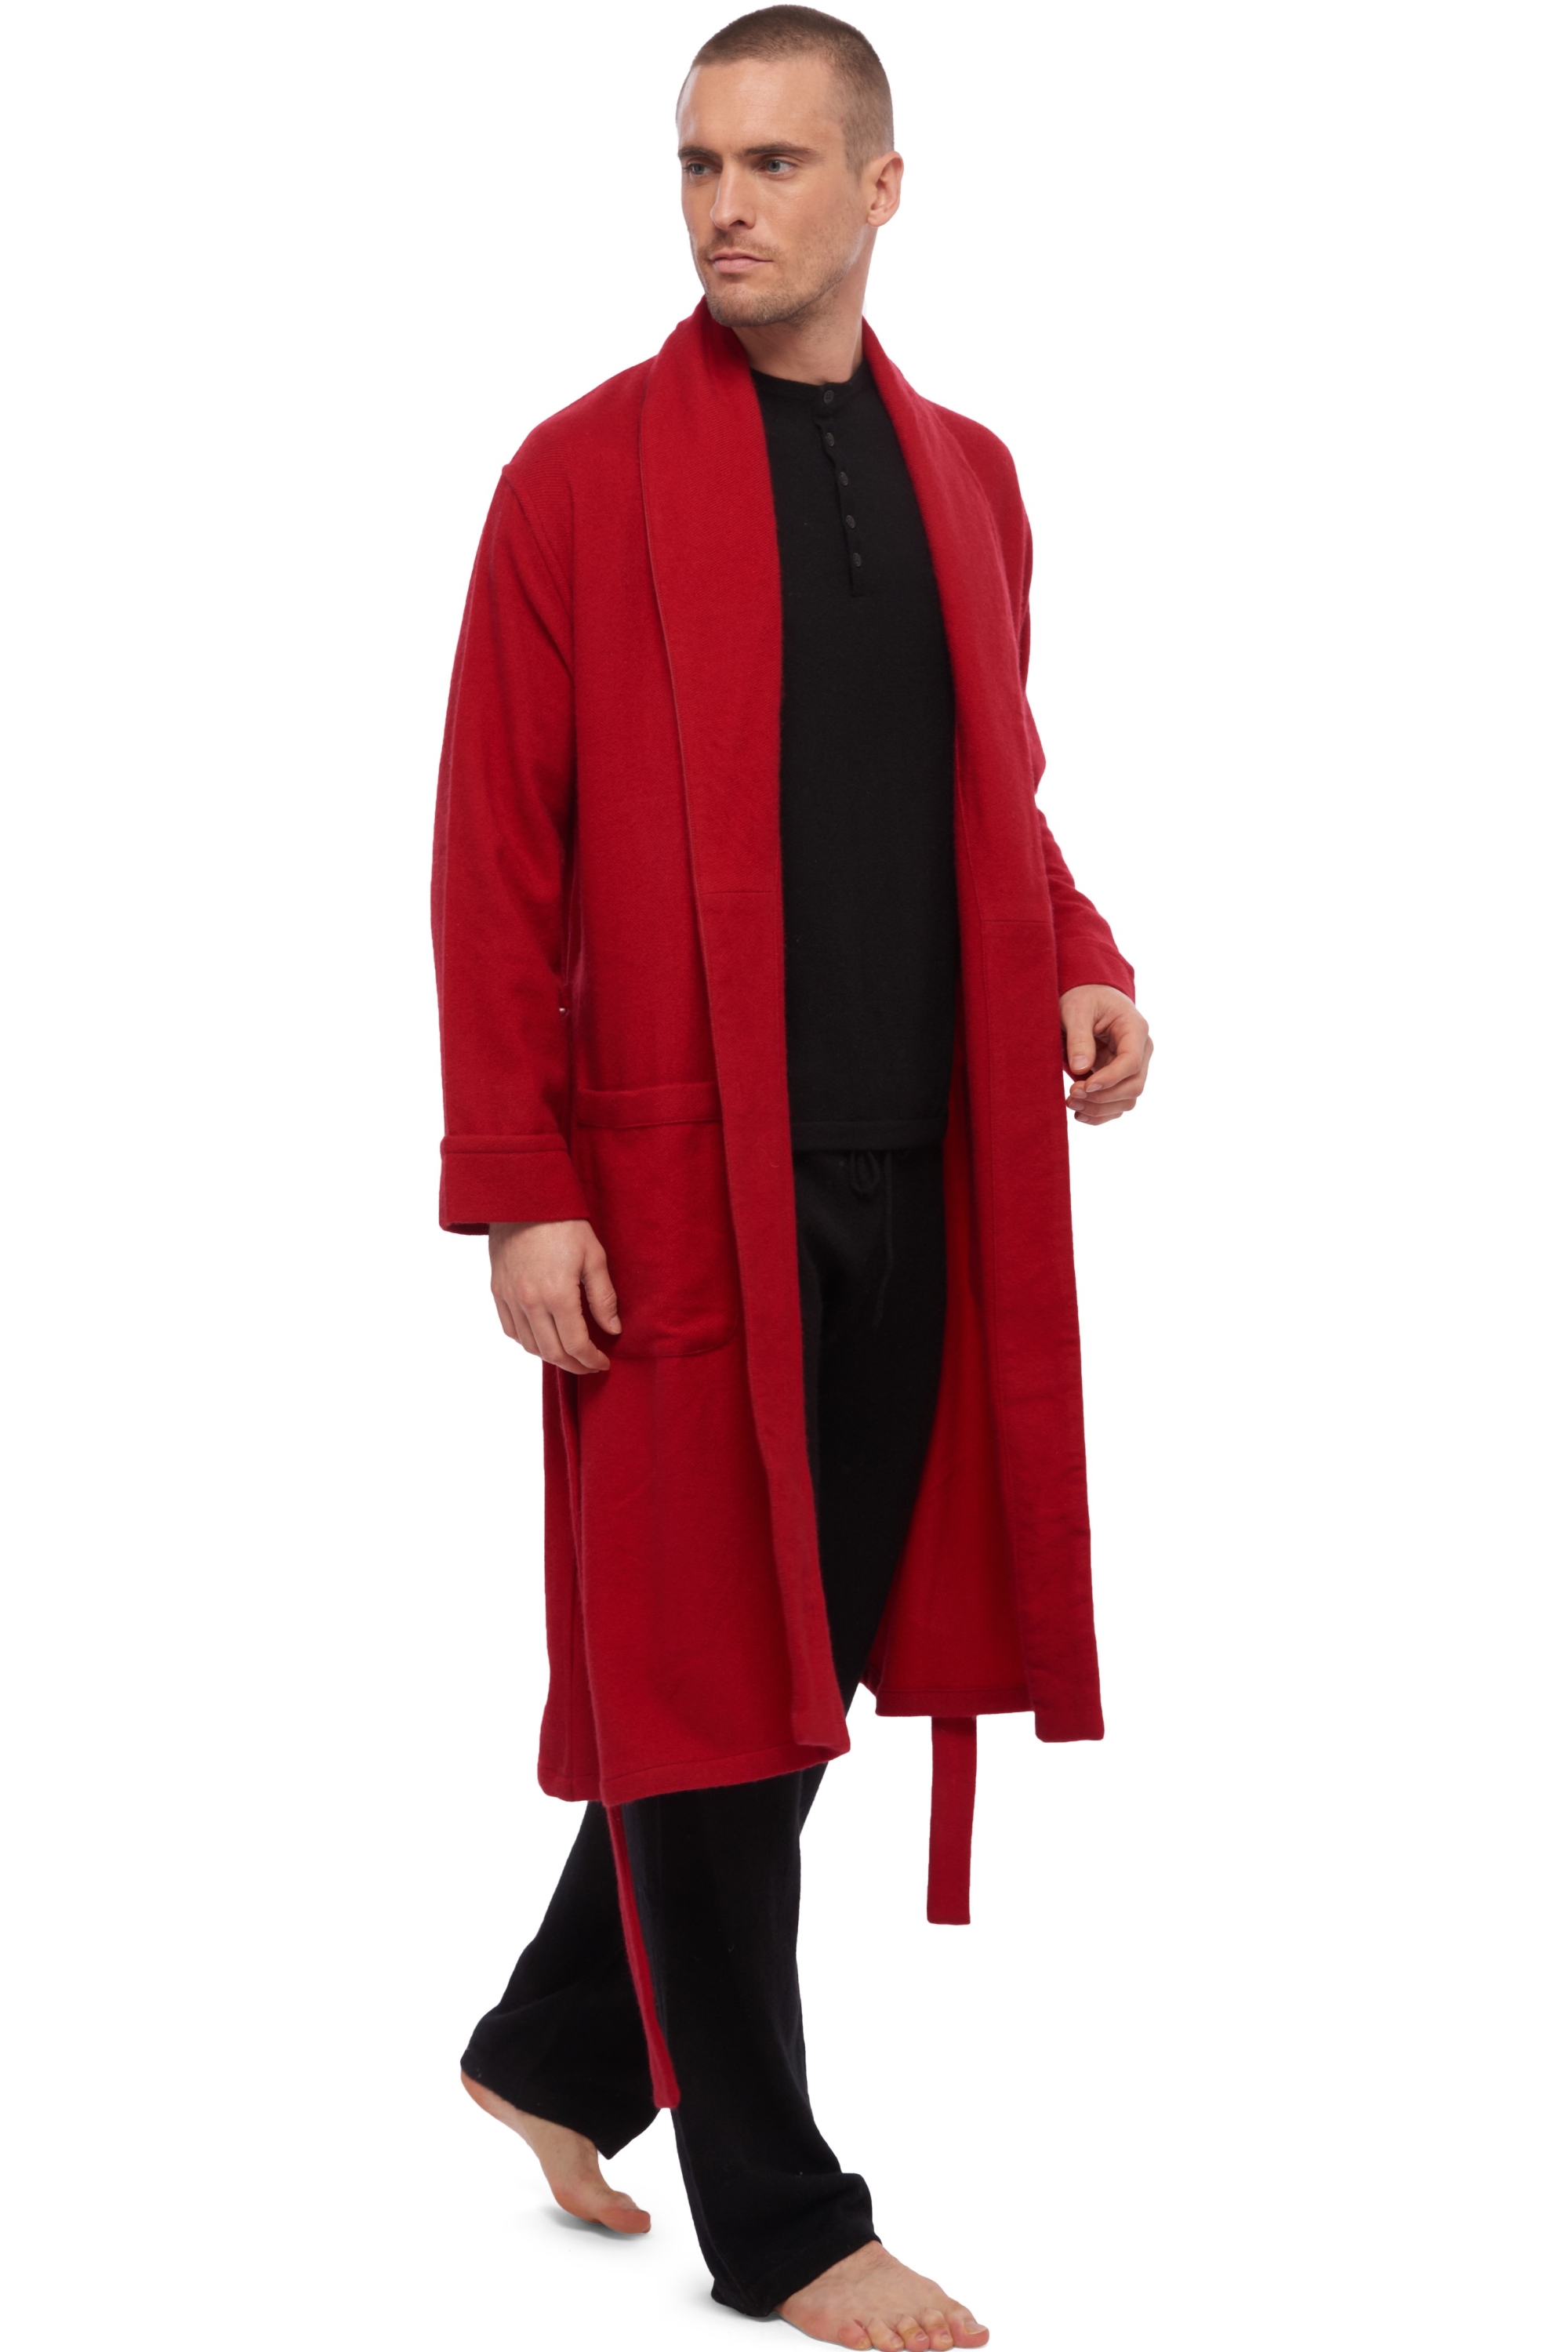 Cachemire robe chambre homme working rouge profond t2